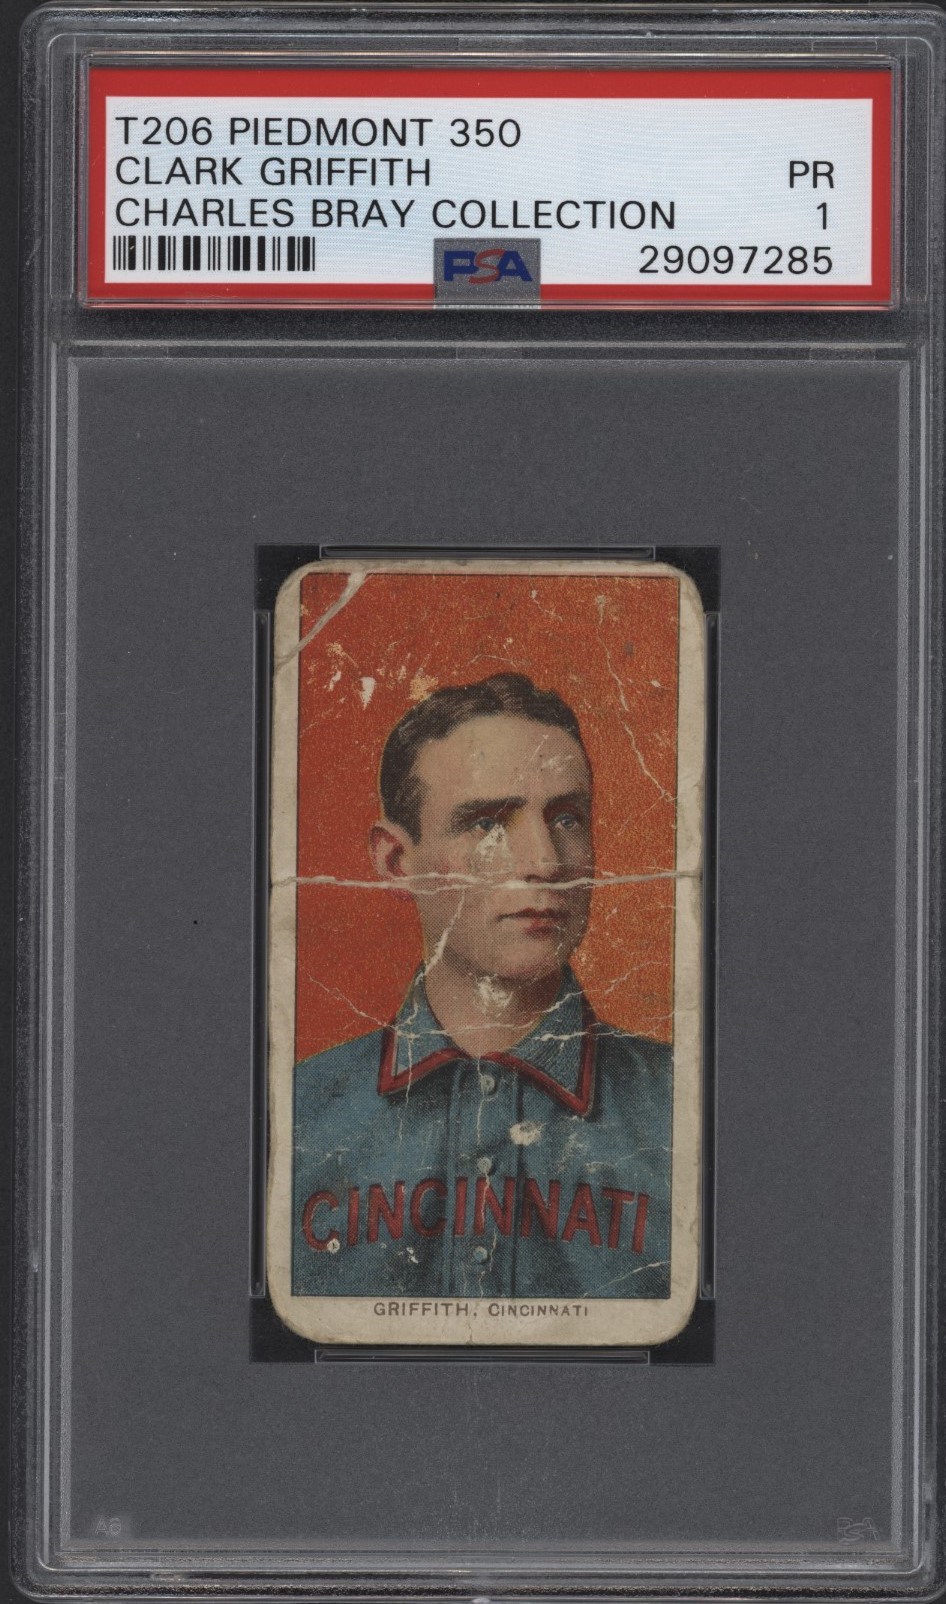 - T206 Piedmont 350 Cark Griffith PSA 1 From the Charles Bray Collection